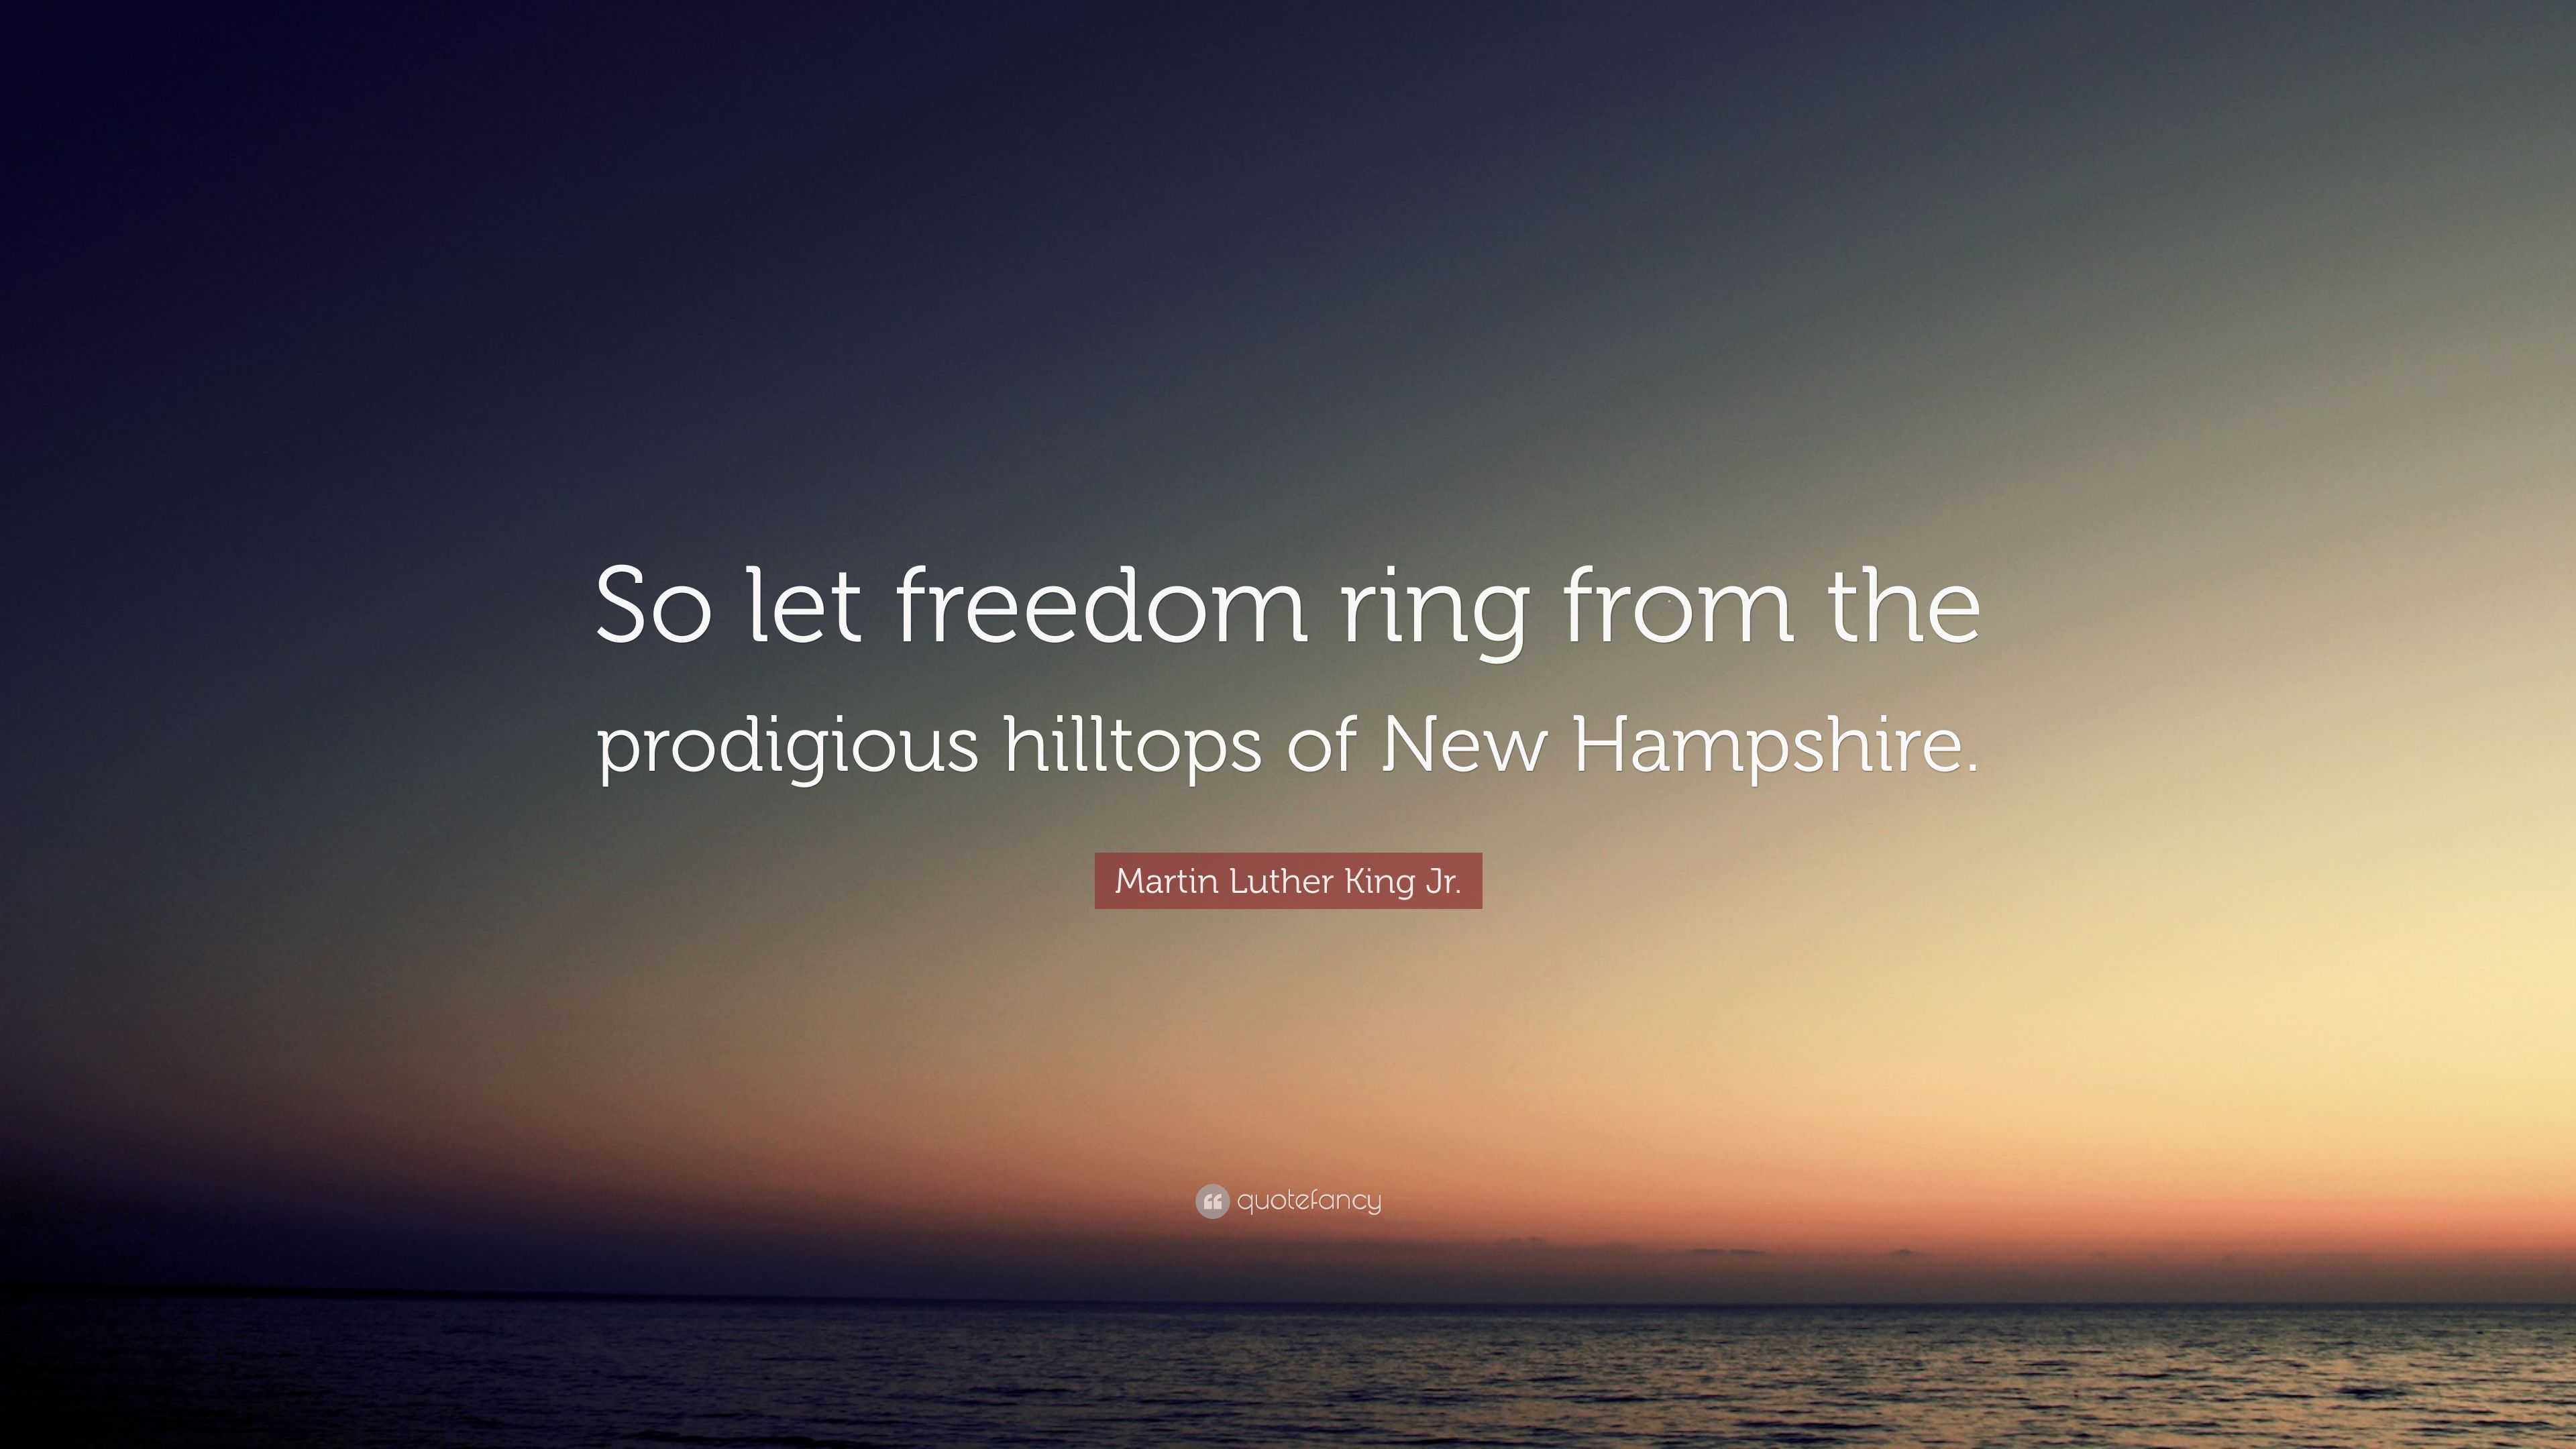 Martin Luther King Jr Quote So Let Freedom Ring From The Prodigious Hilltops Of New Hampshire